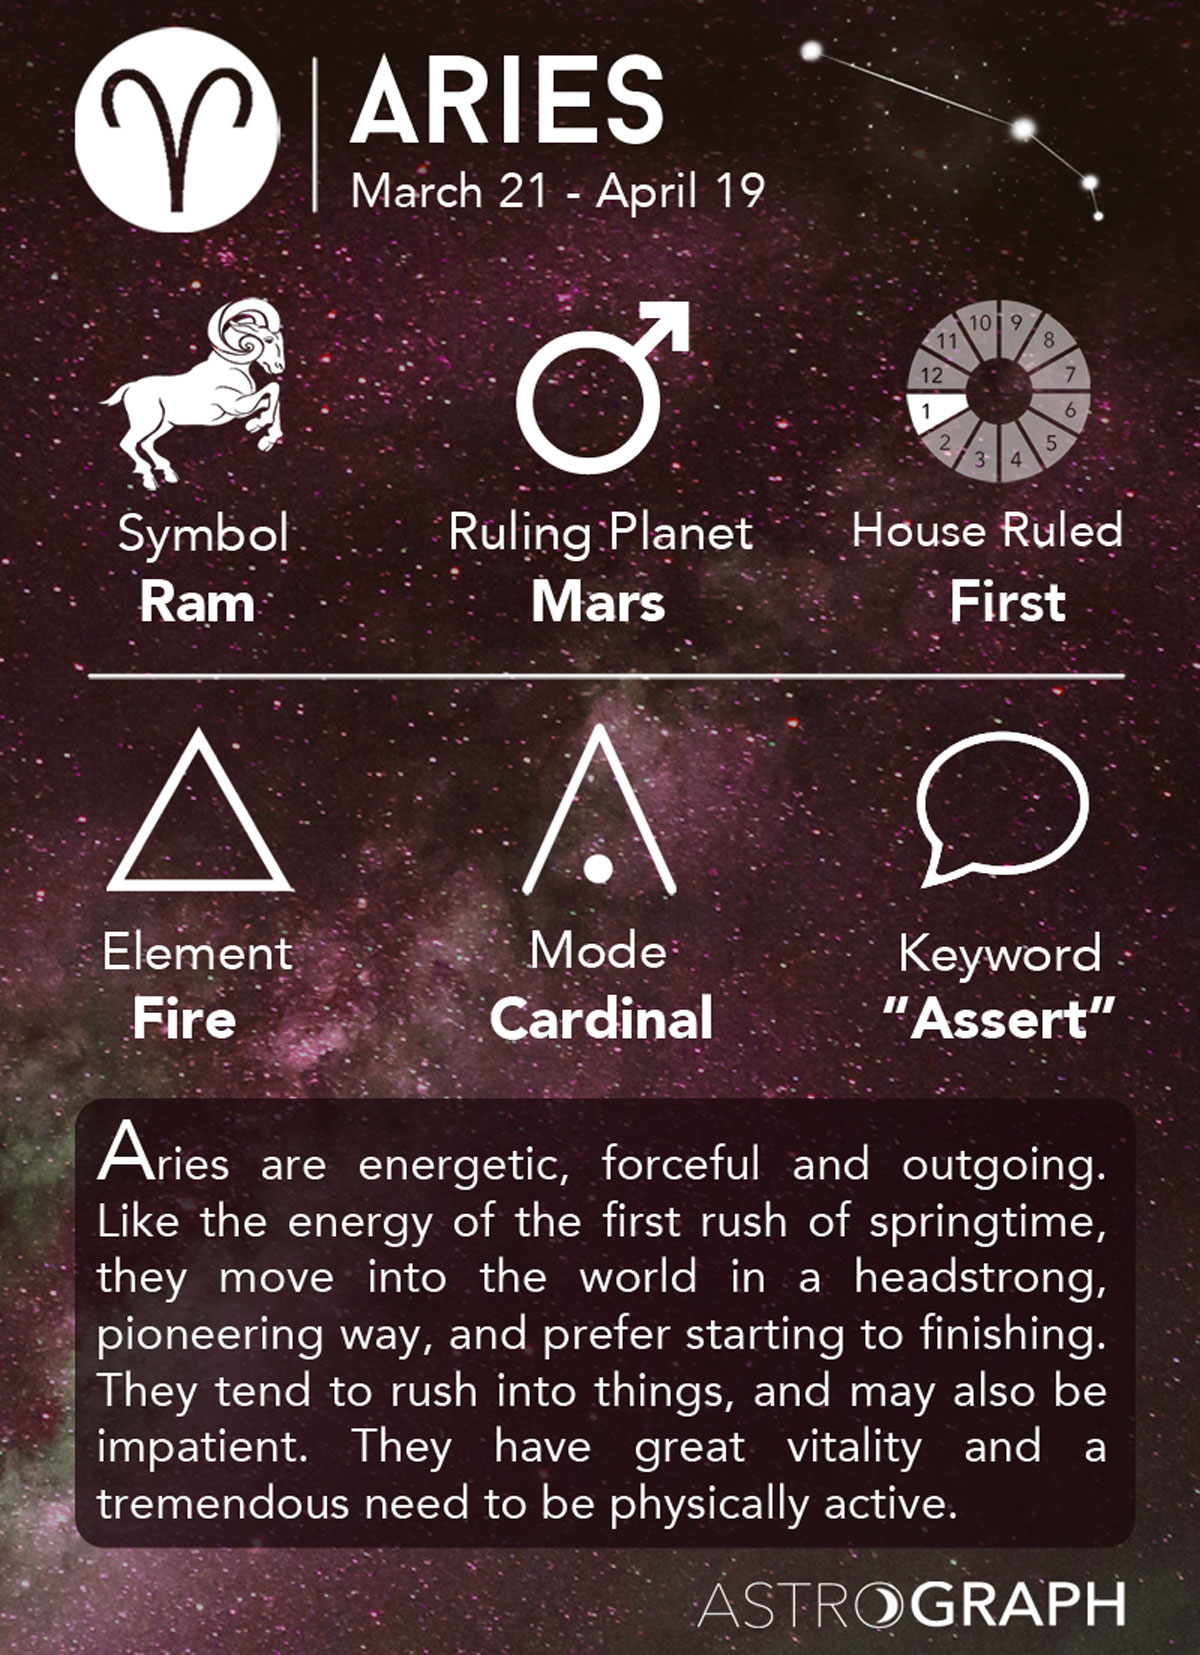 What Is Aries?